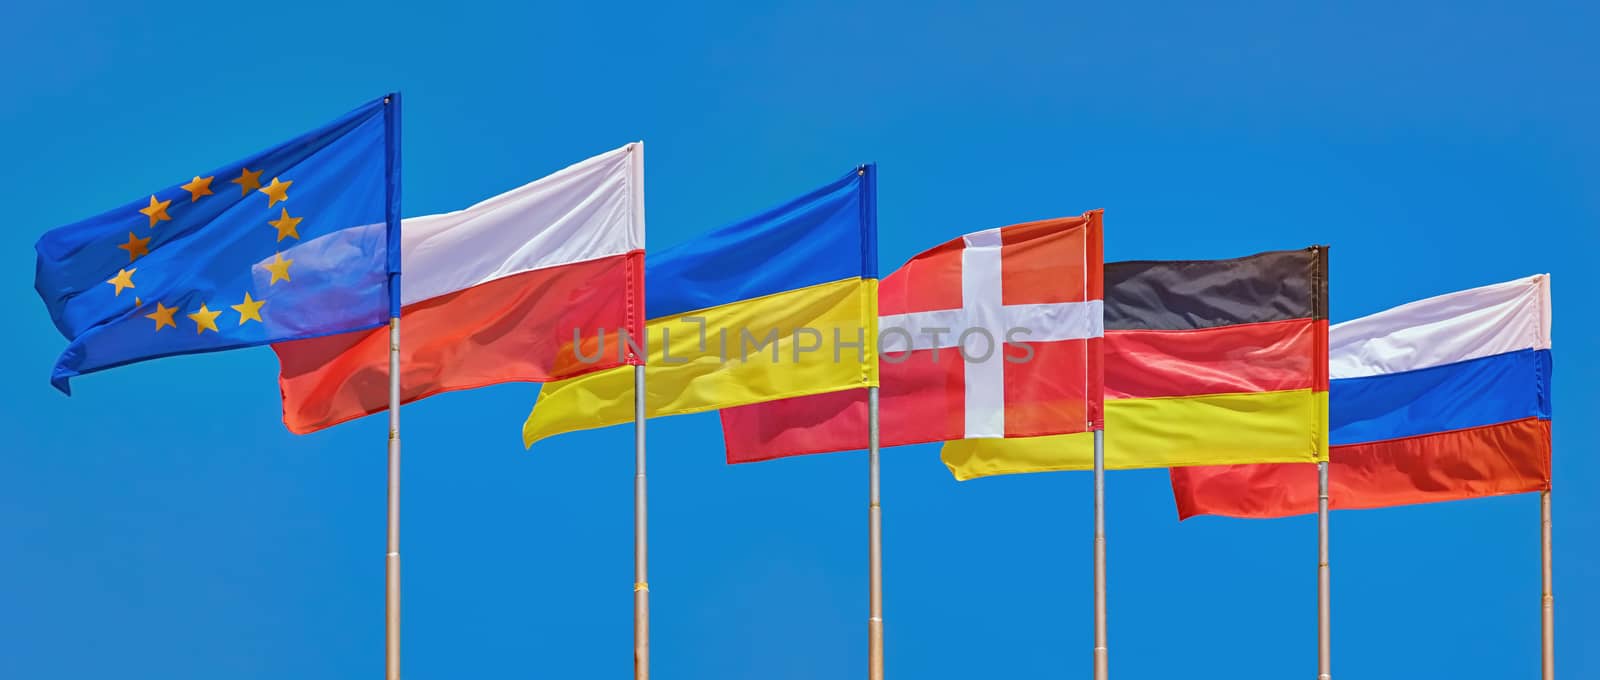 Flags of Different Countries on a Background of Blue Sky